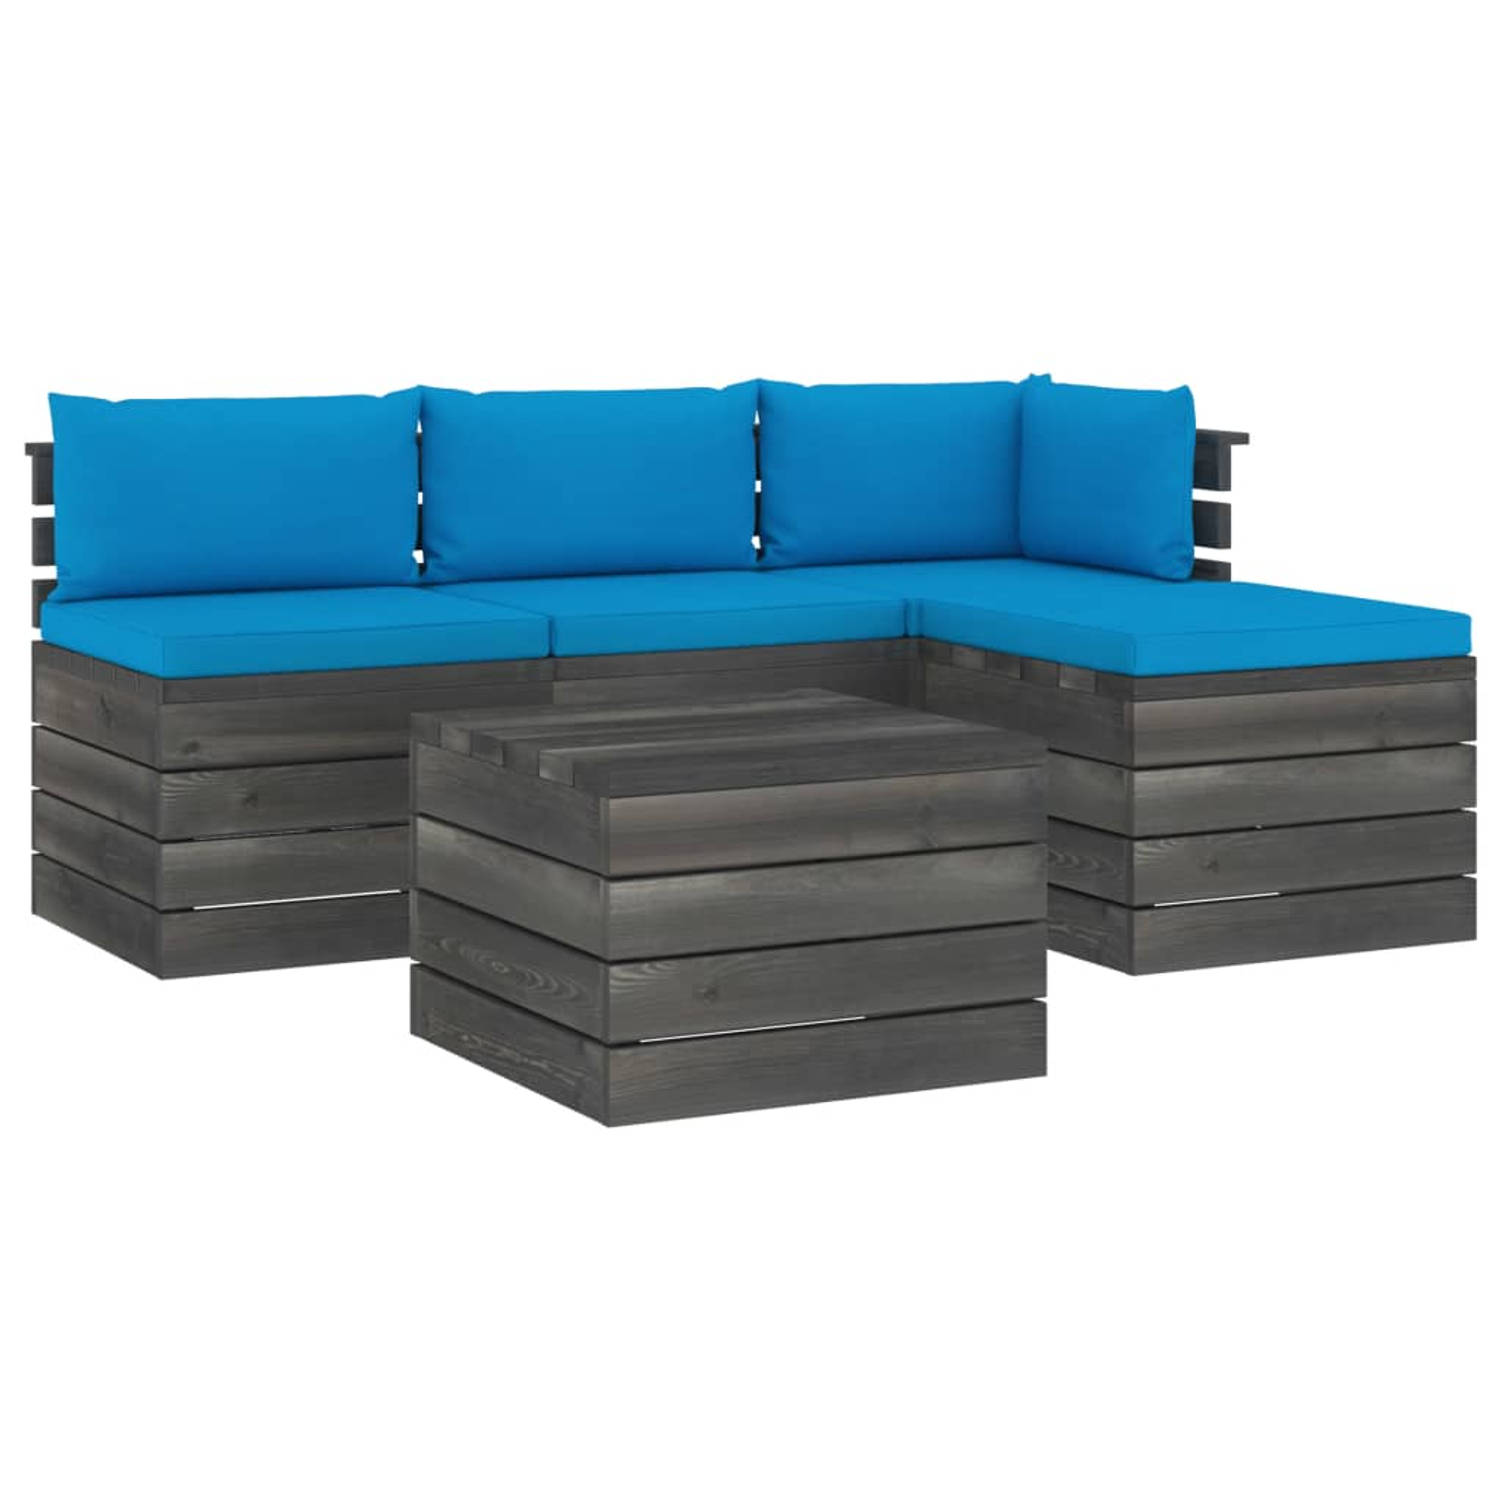 The Living Store Loungeset Pallet Grenenhout - 60x65x71.5 cm - Lichtblauw